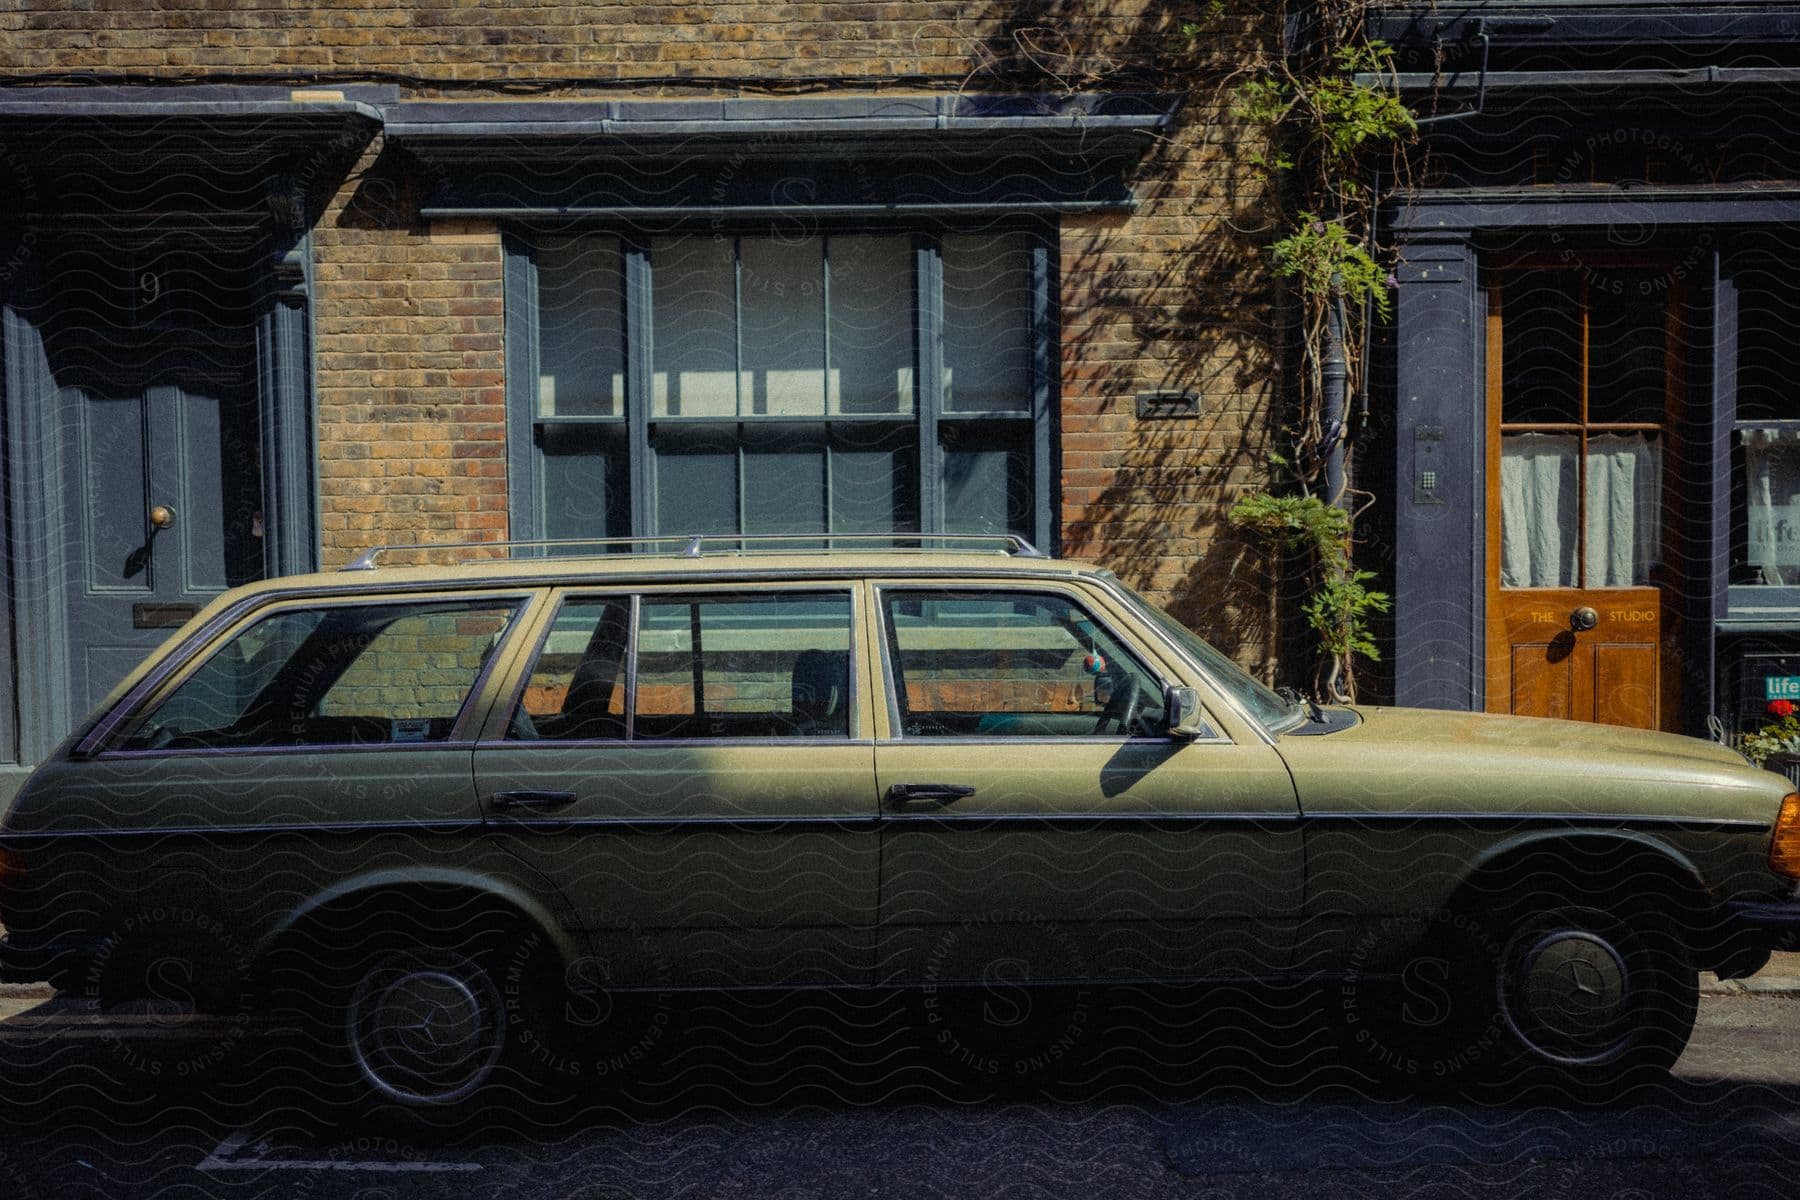 An olive-colored vintage station wagon is parked in front of a brick building with two doors and one window in the suburbs.